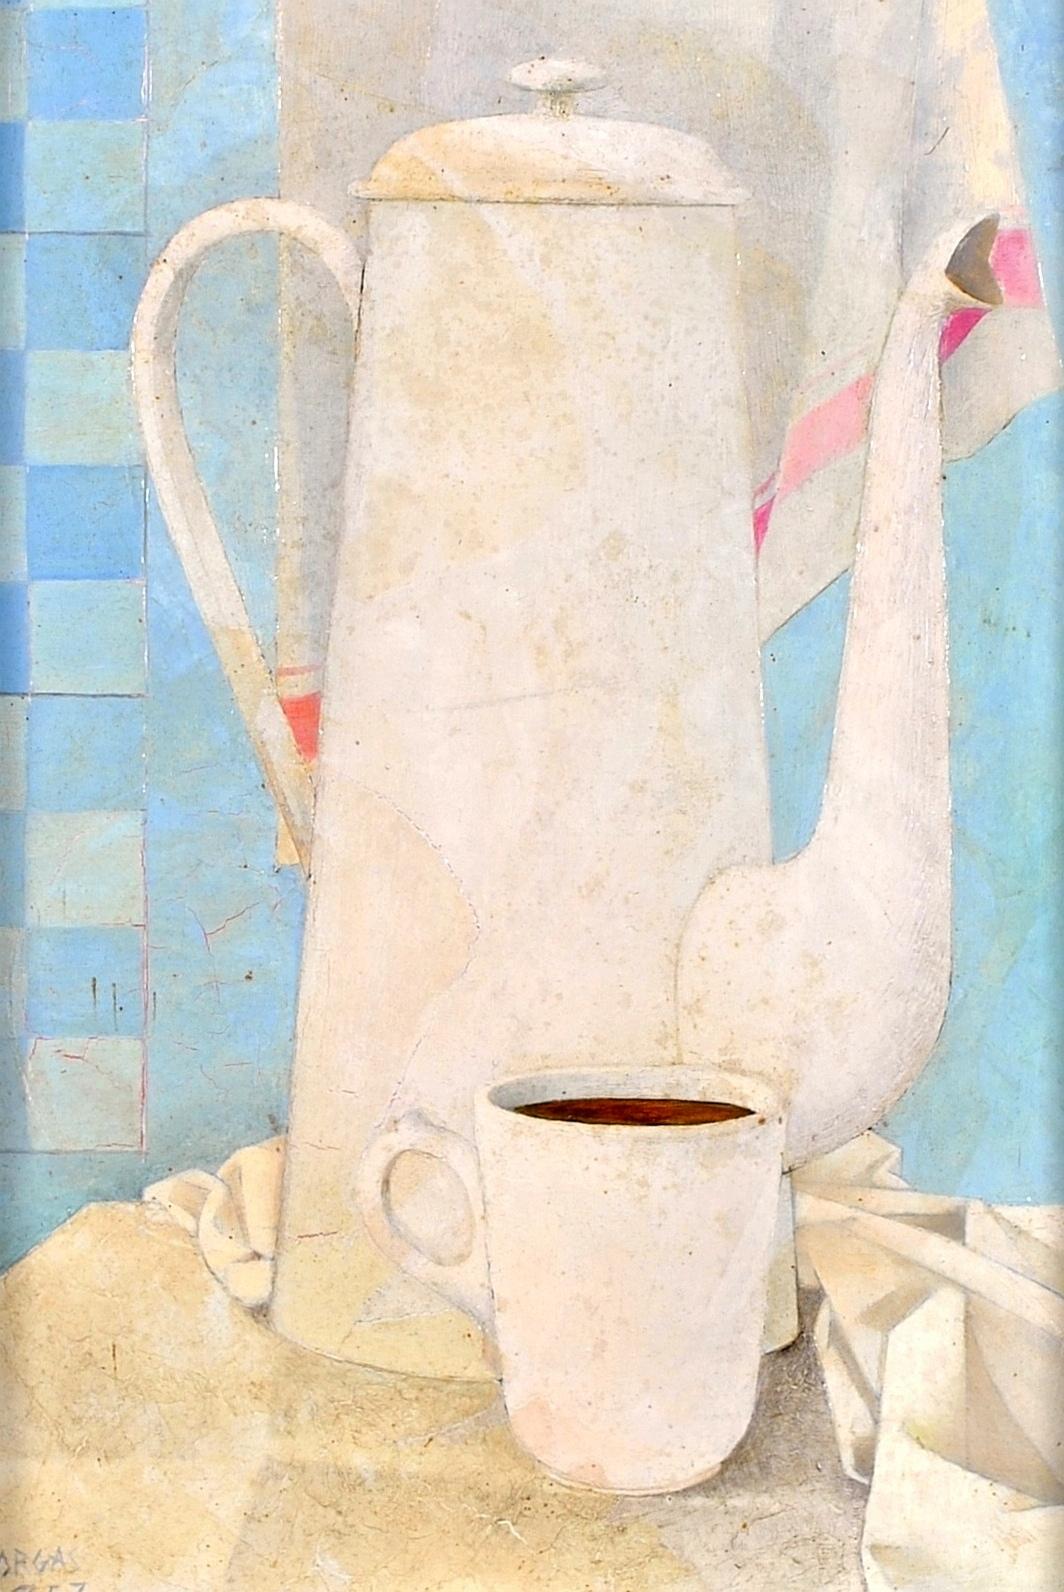 A beautiful signed and dated 1957 French cubist oil on board depicting a white coffee pot and cup of coffee. Presented in its original fabric and gilt wood frame.

A lovely original French oil painting which would look fantastic in a kitchen or